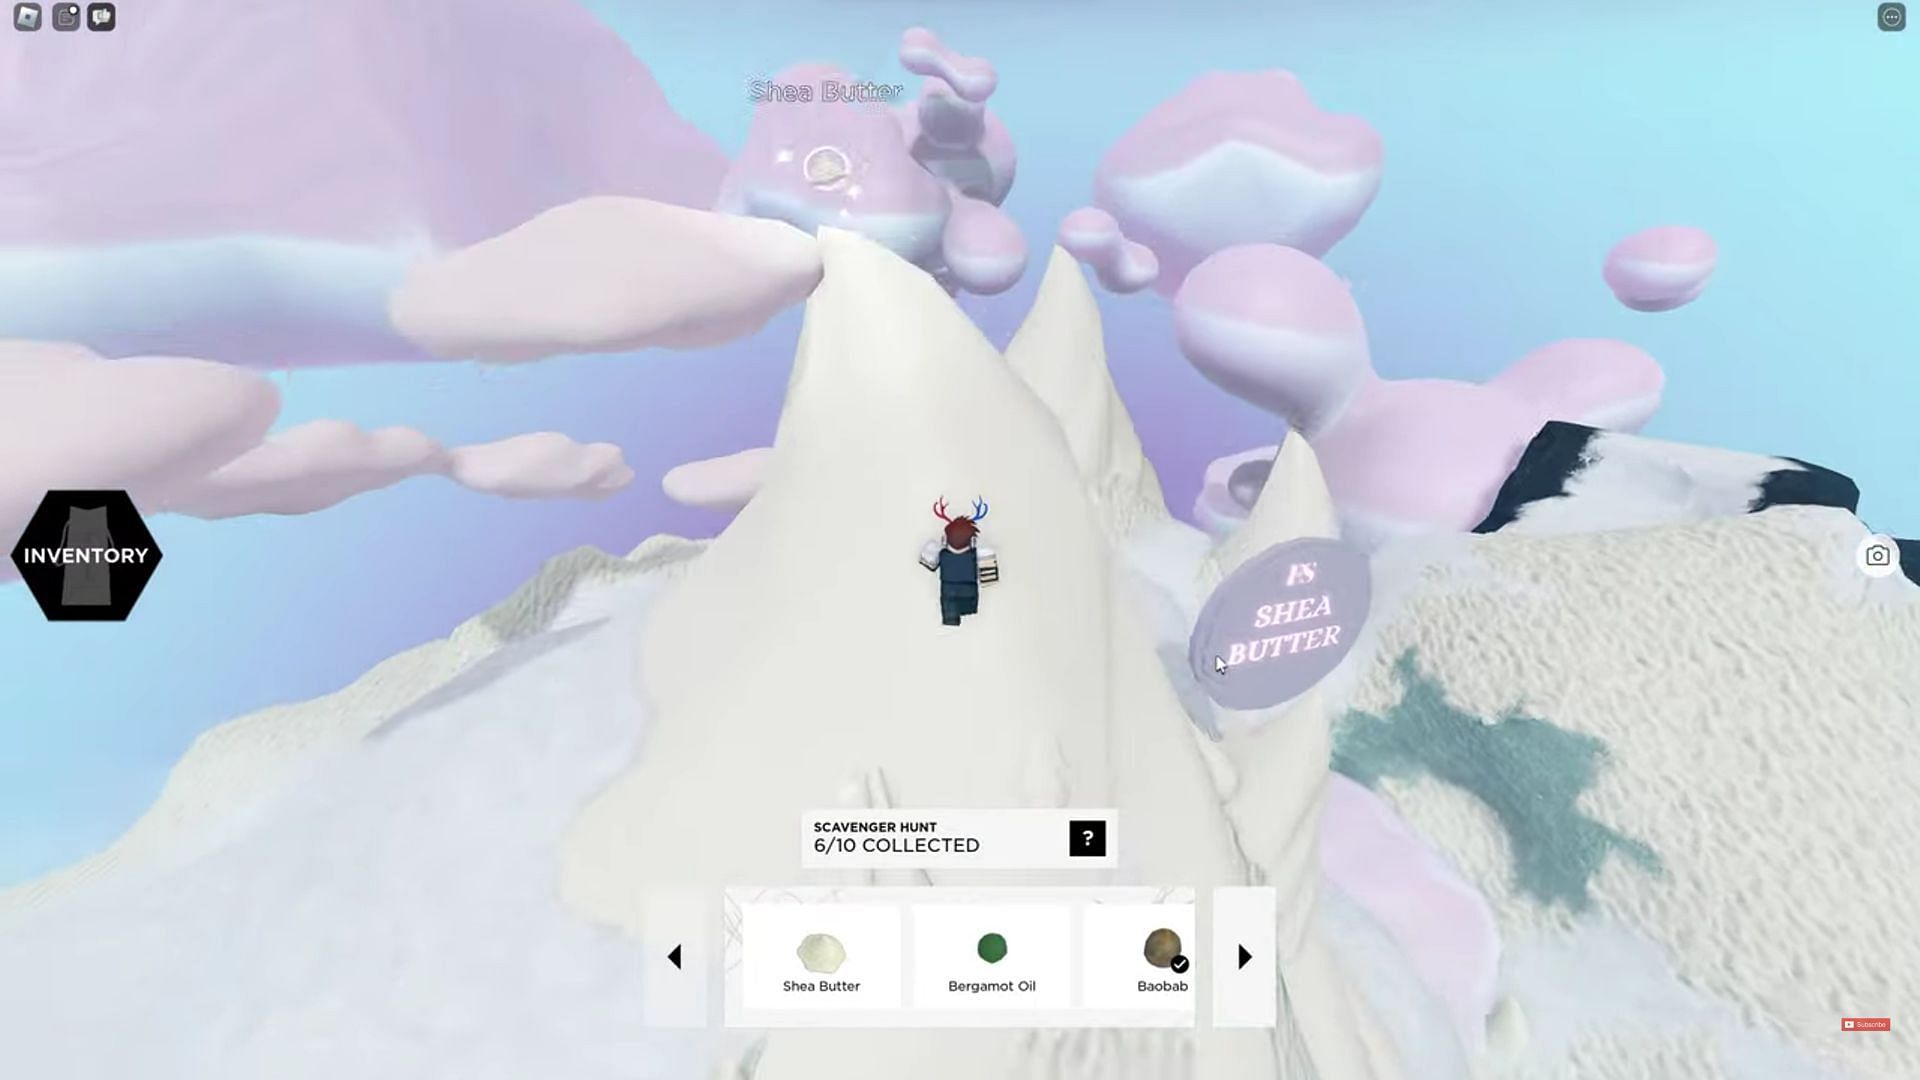 The seventh ingredient on the mountain top next to a cloud platform (Image via Conor3D/YouTube)